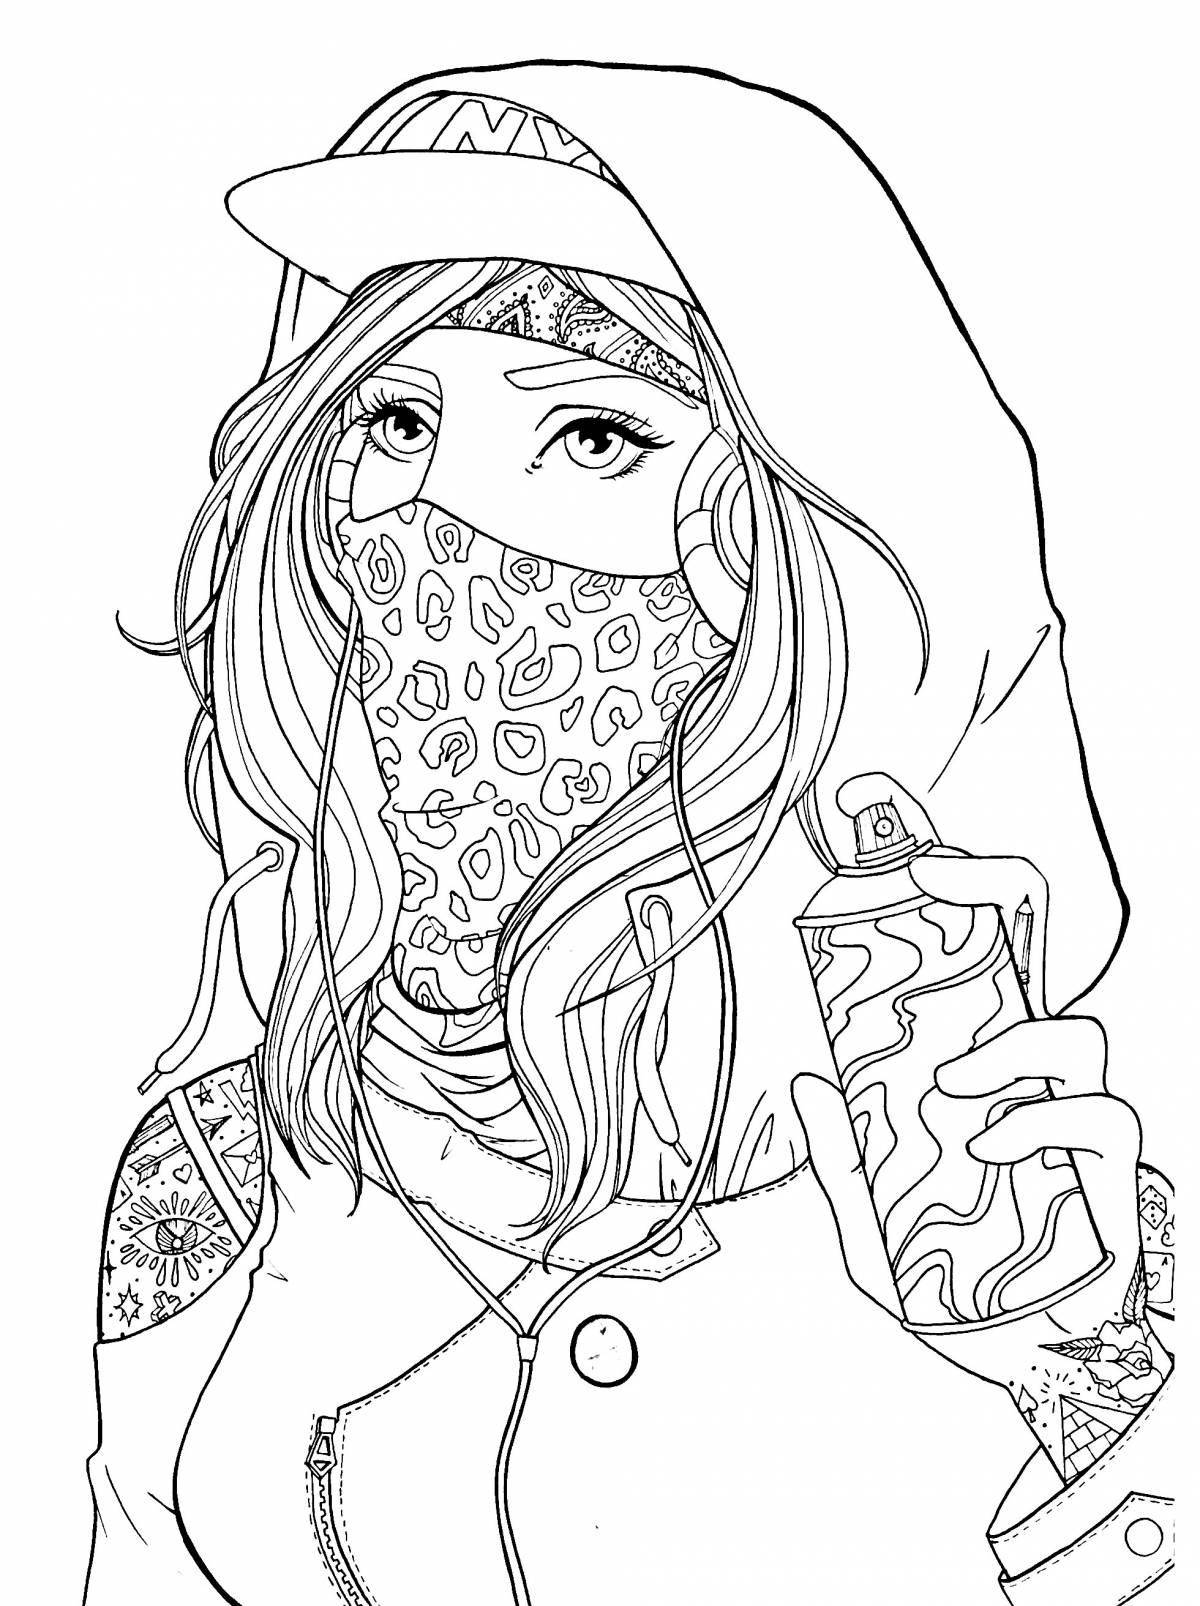 Awesome cool coloring pages for girls 14 years old